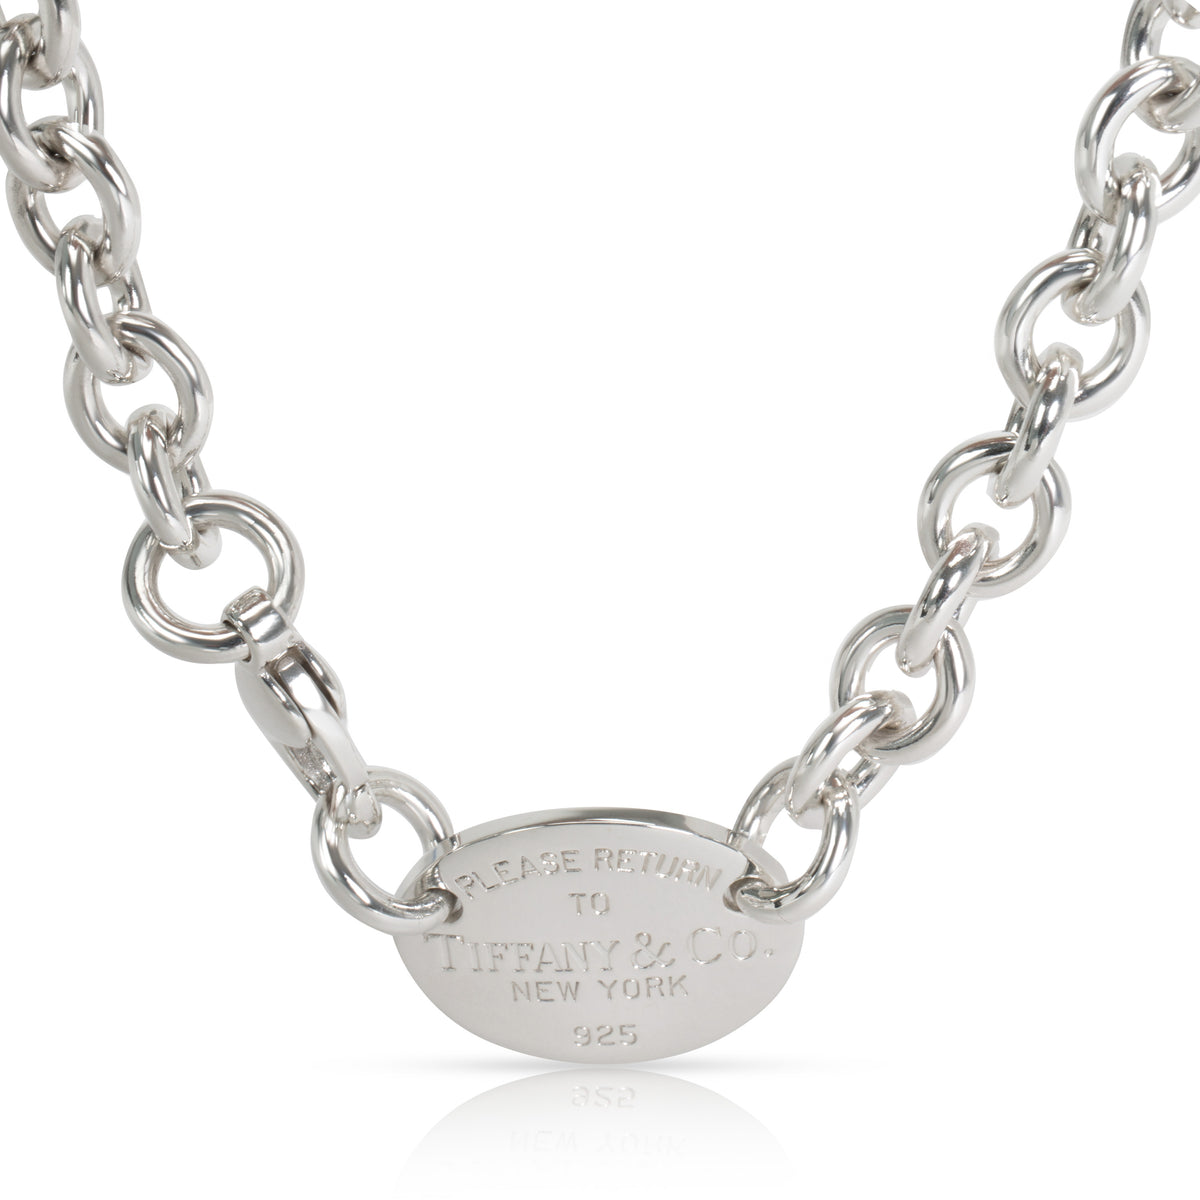 Tiffany & Co. Return to Tiffany Oval Tag Necklace in  Sterling Silver